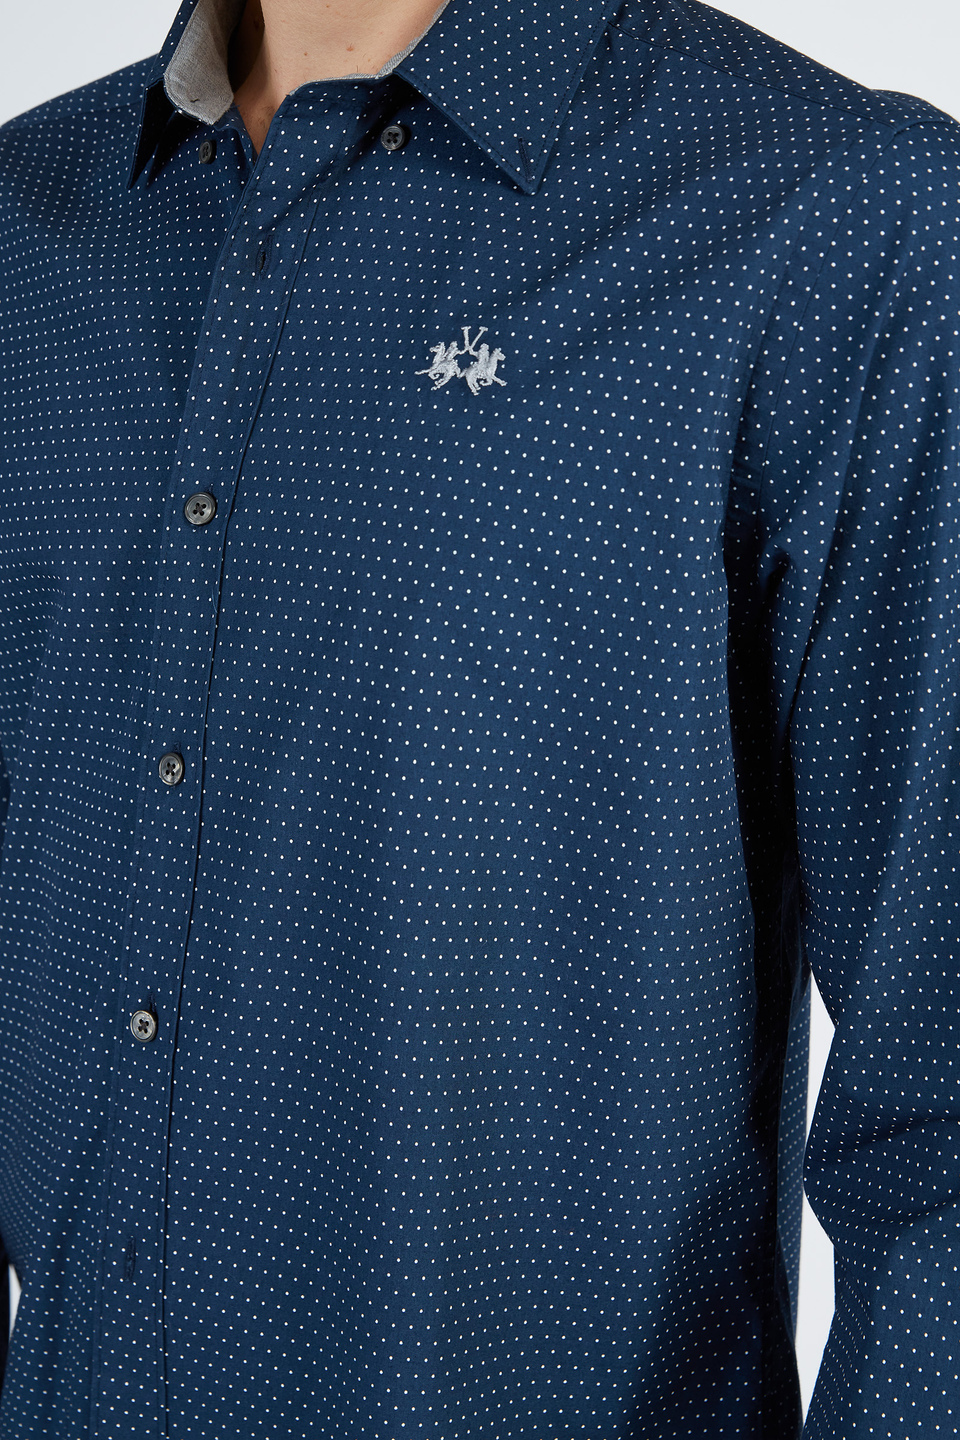 Men’s Timeless shirt with polka dots pattern and long sleeves in regular fit cotton | La Martina - Official Online Shop